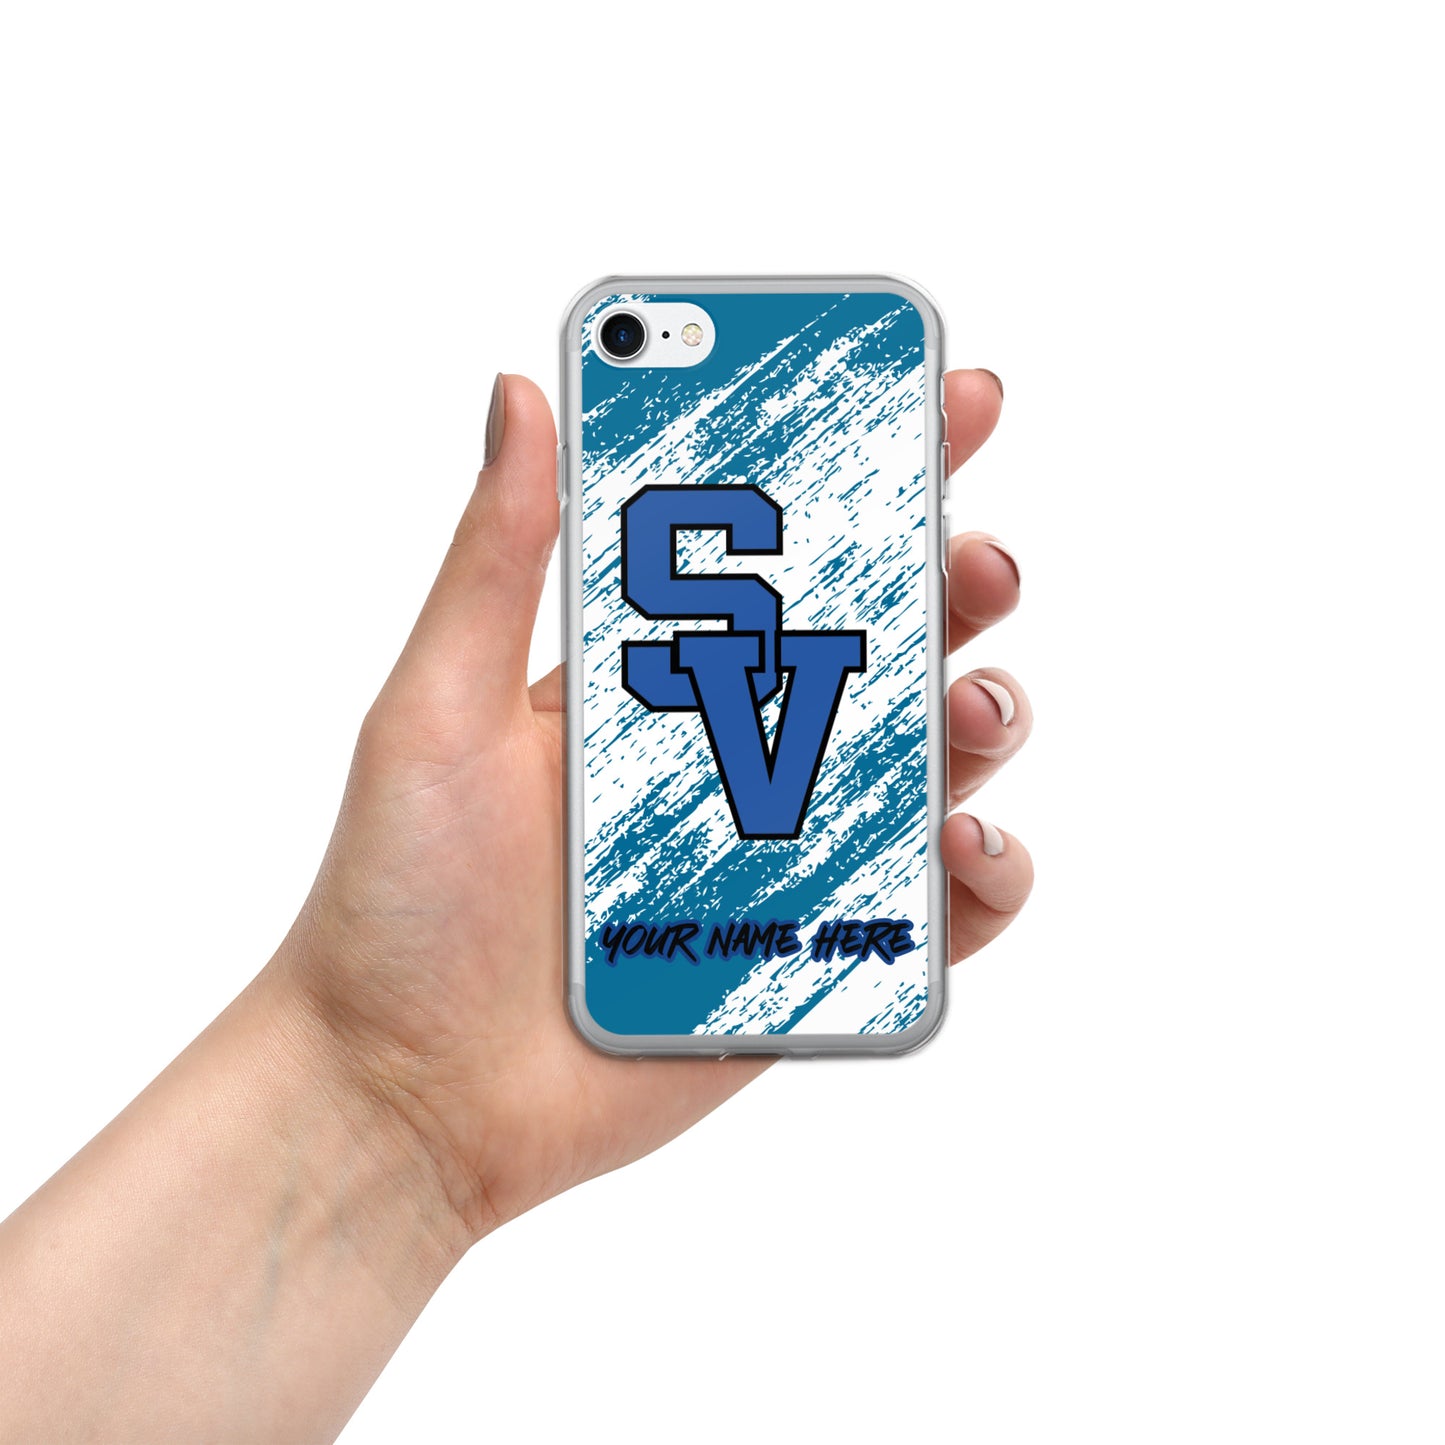 Personalized iPhone Case - Shelby Valley High School